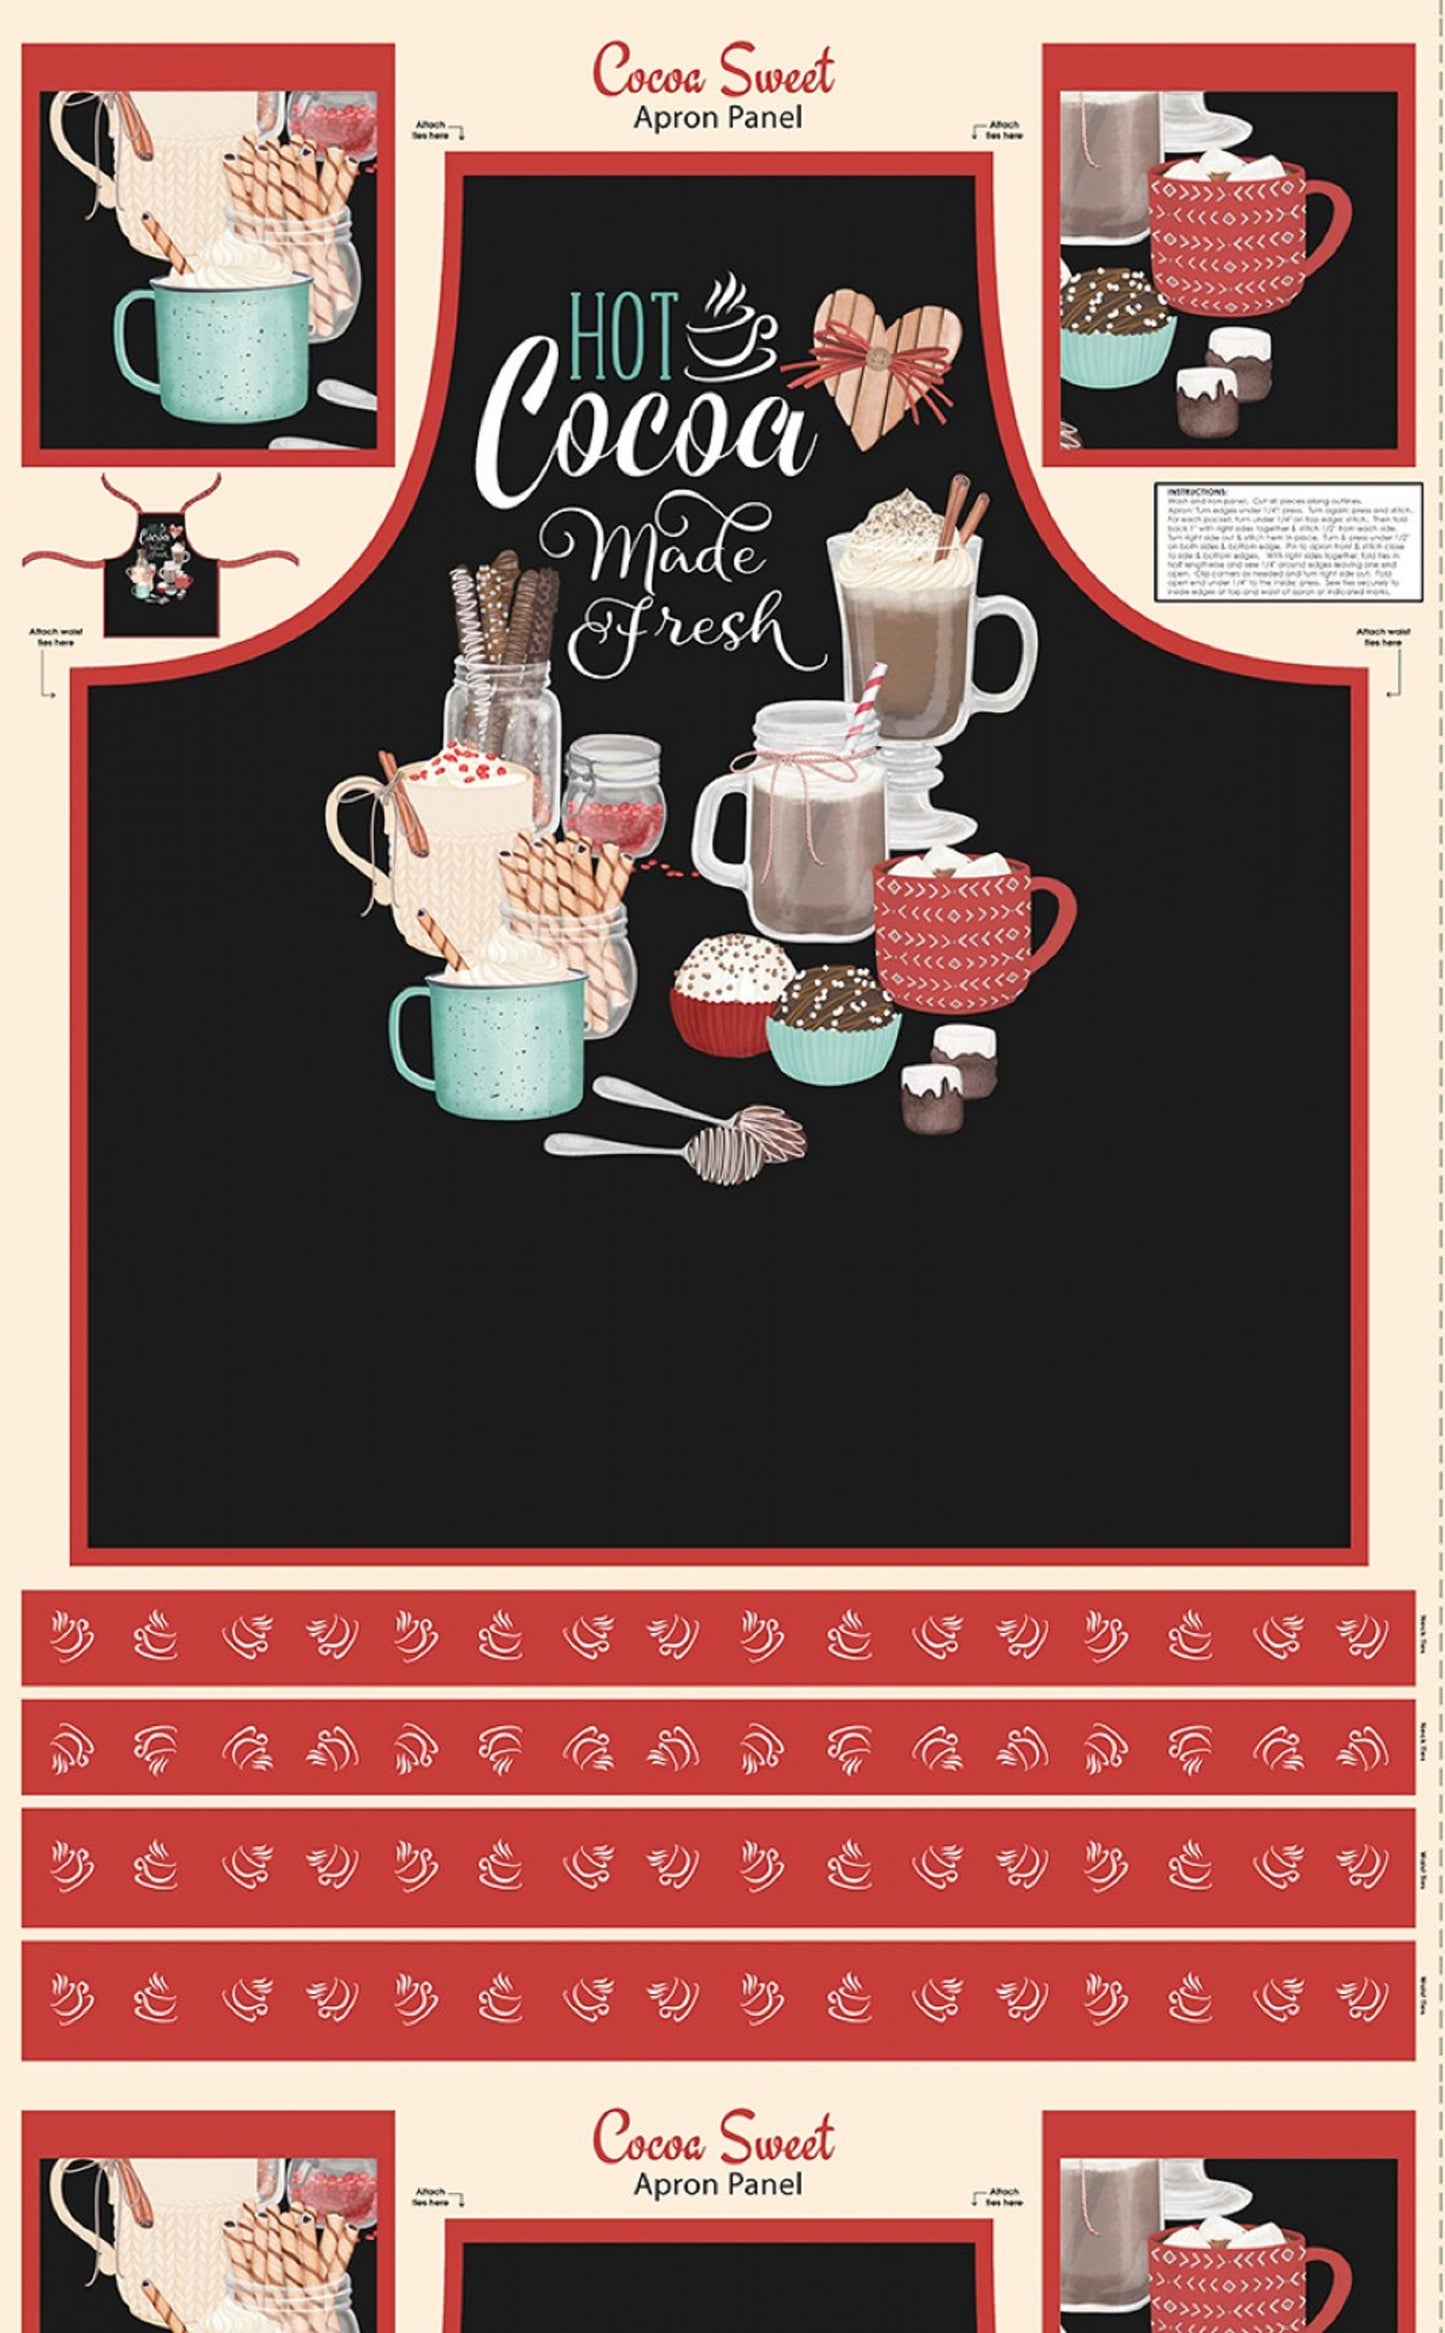 Cocoa Sweet Apron Panel by Wilmington Prints